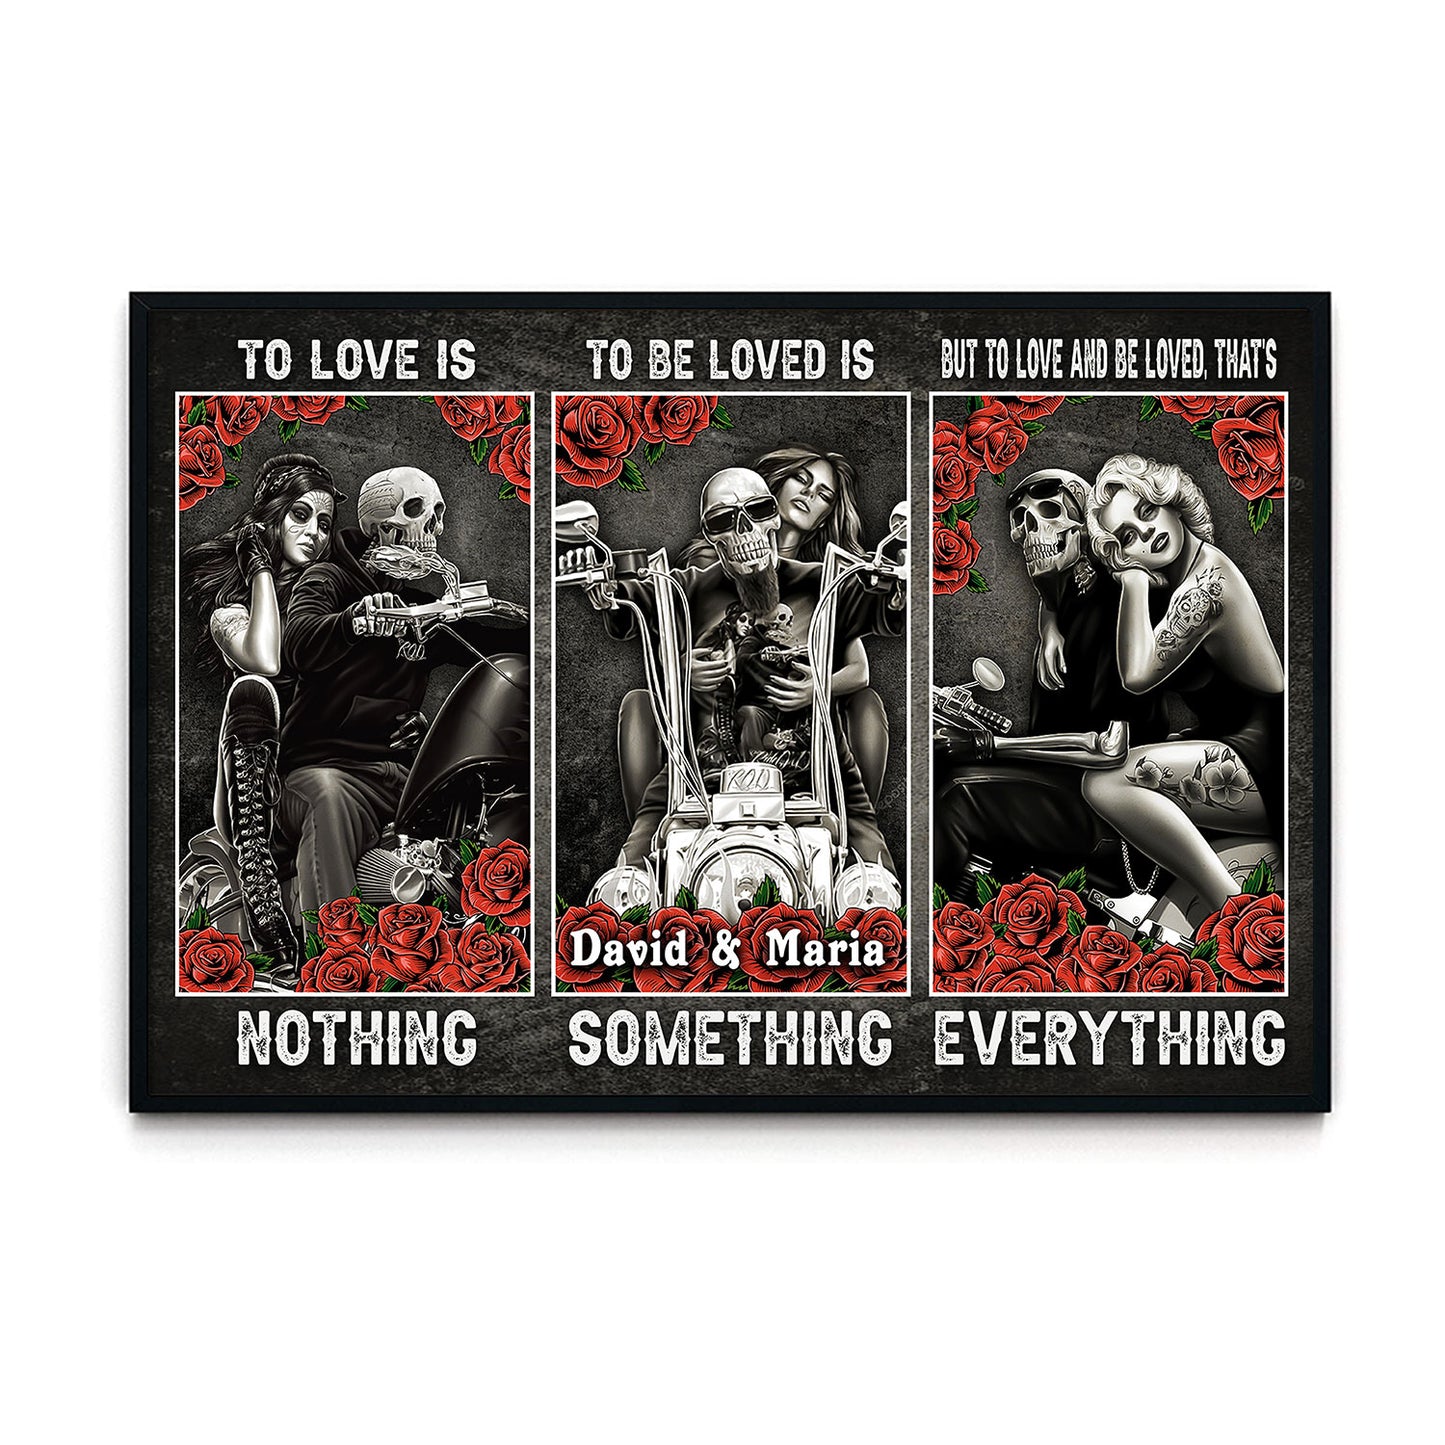 To Love And Be Loved That's Everything Personalized Skull Poster